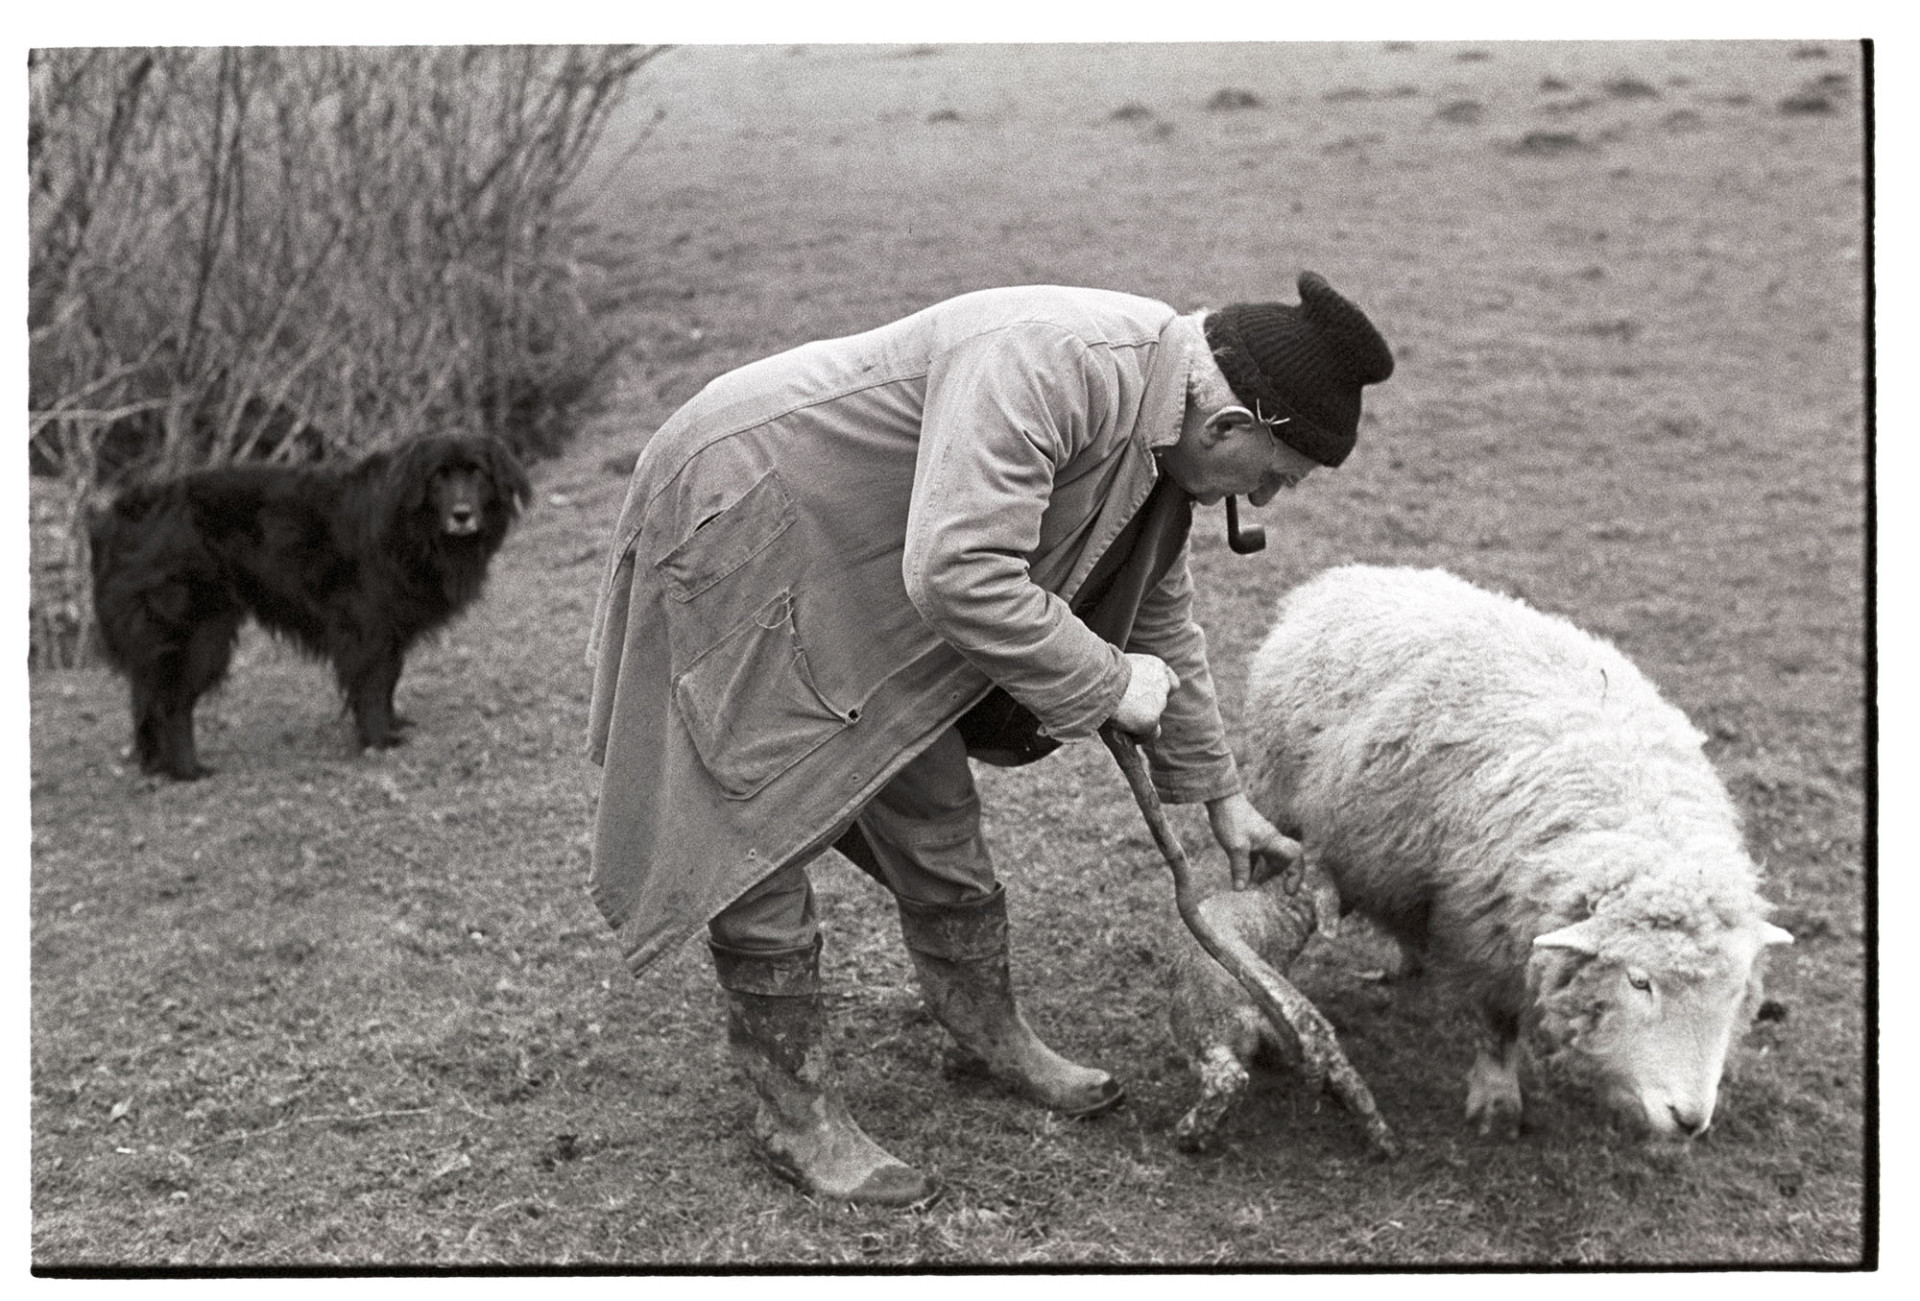 Shepherd making ewe accept a lamb after birth. Dog.
[Archie Parkhouse persuading a ewe to accept a new born lamb at Addisford, Dolton, as his dog looks on. He is smoking a pipe.]